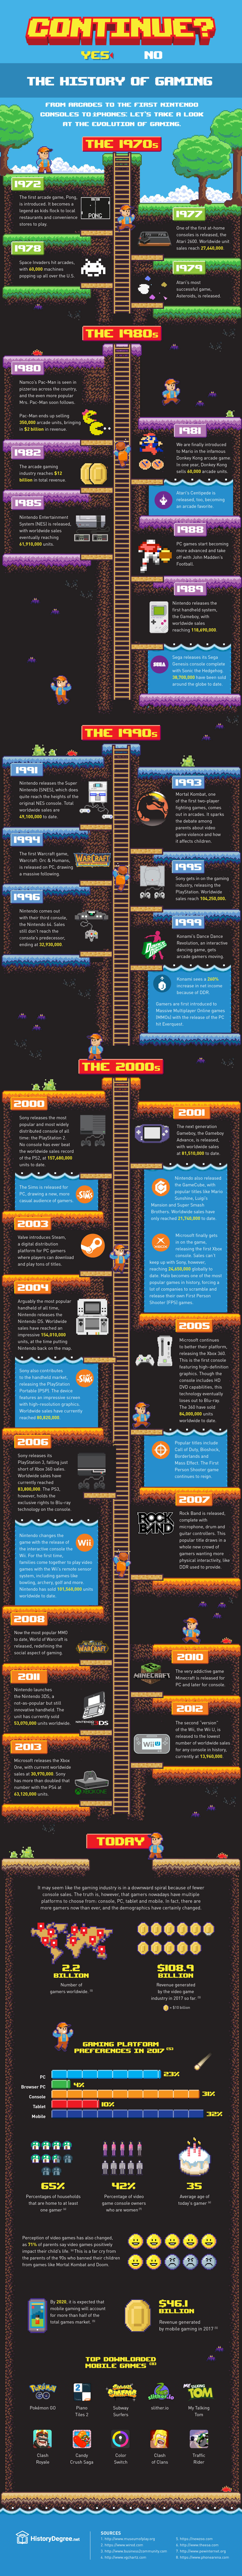 Gaming: Then and Now - Infographic